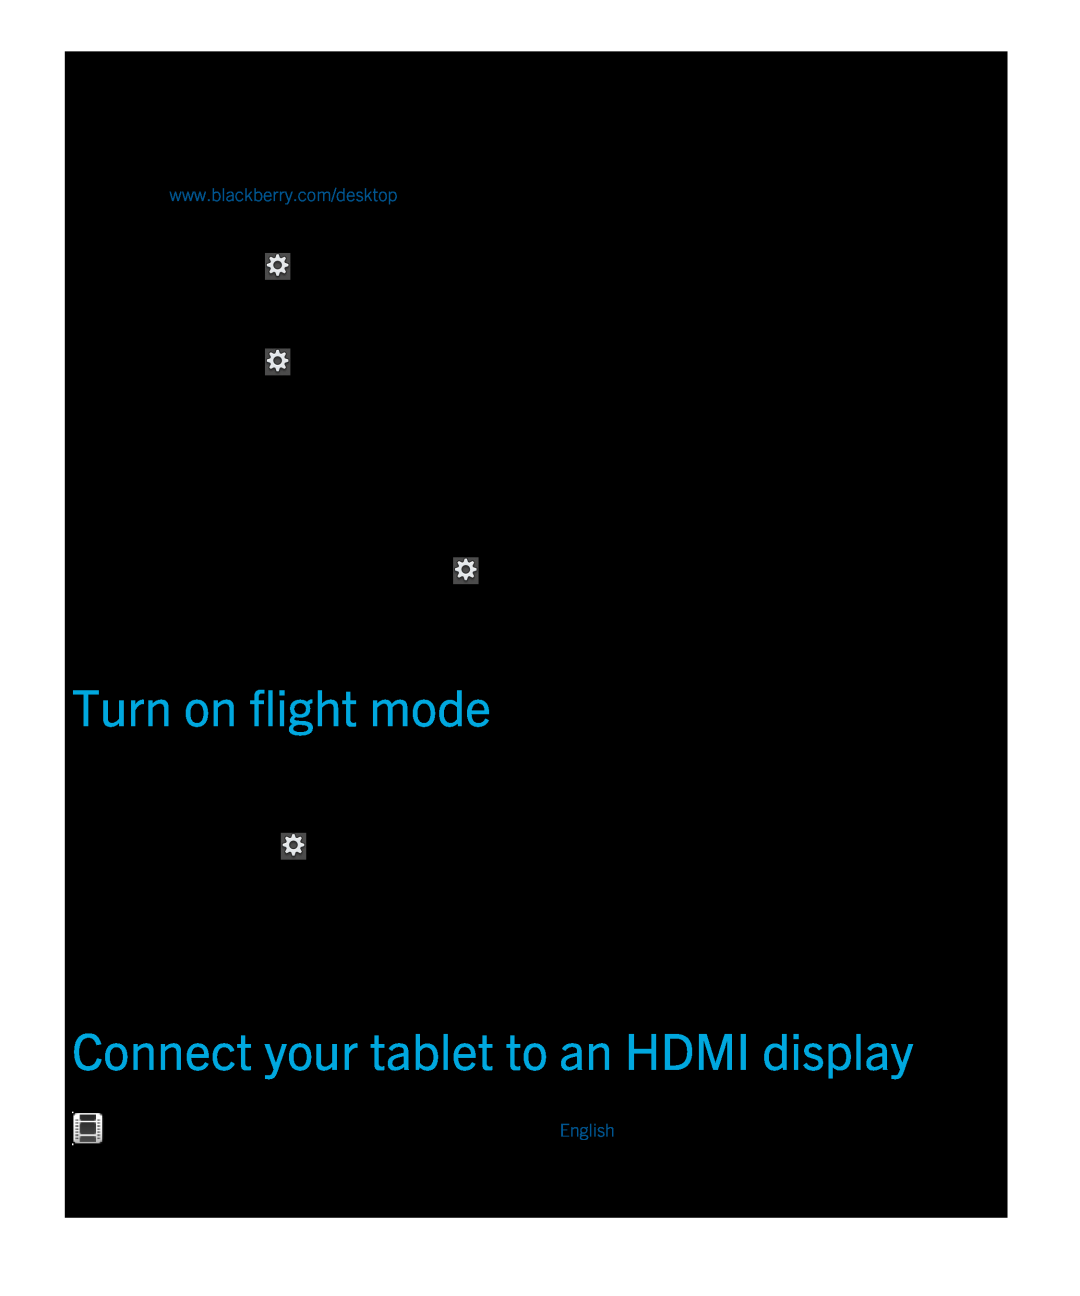 Blackberry 2.0.1 manual Turn on flight mode, Connect your tablet to an HDMI display 